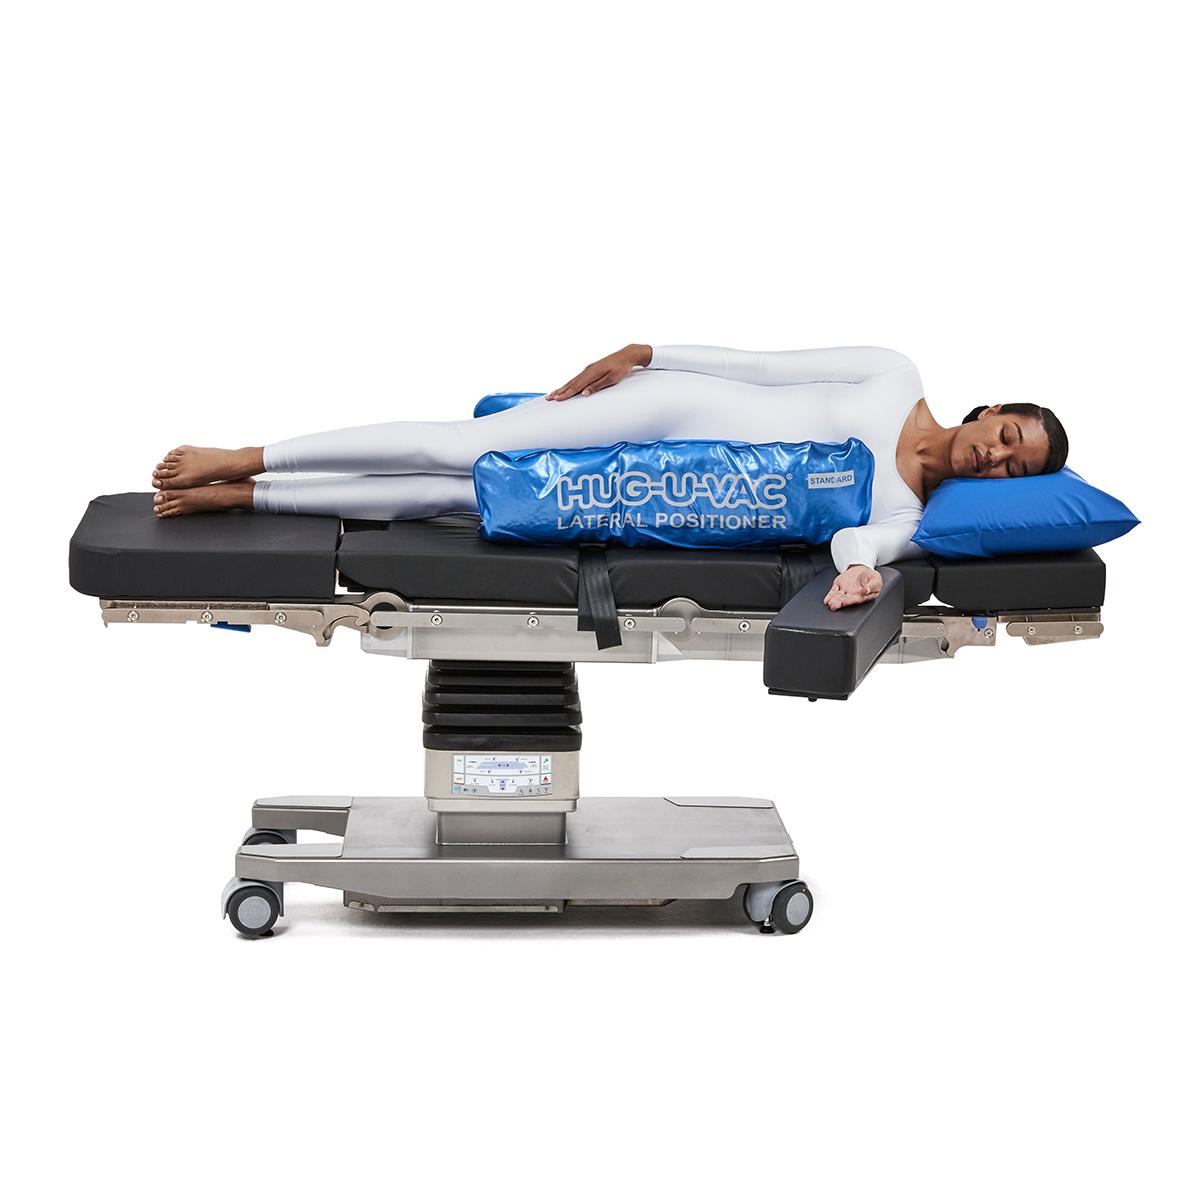 Allen® Hug-U-Vac® Lateral Positioner with patient in lateral position